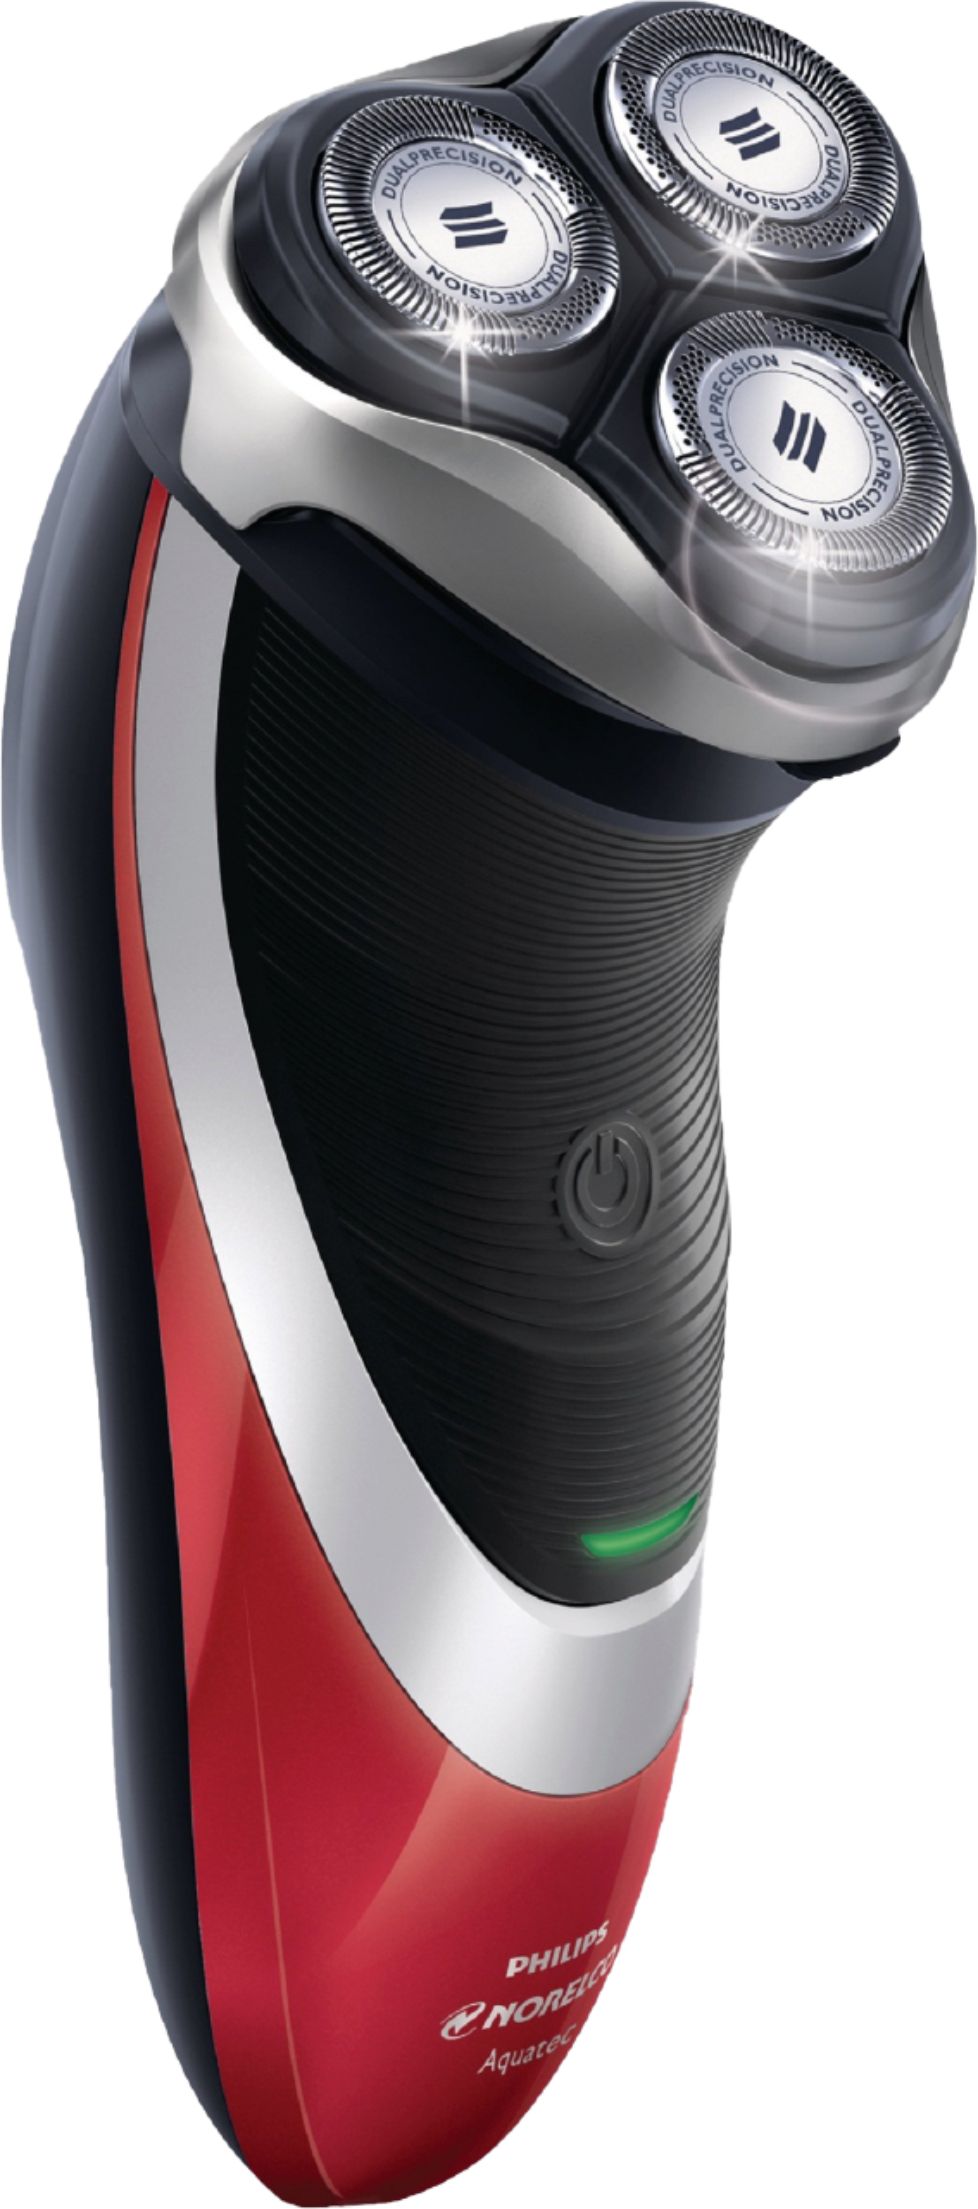 Angle View: Philips Norelco - Rechargeable Wet/Dry Electric Shaver - Red